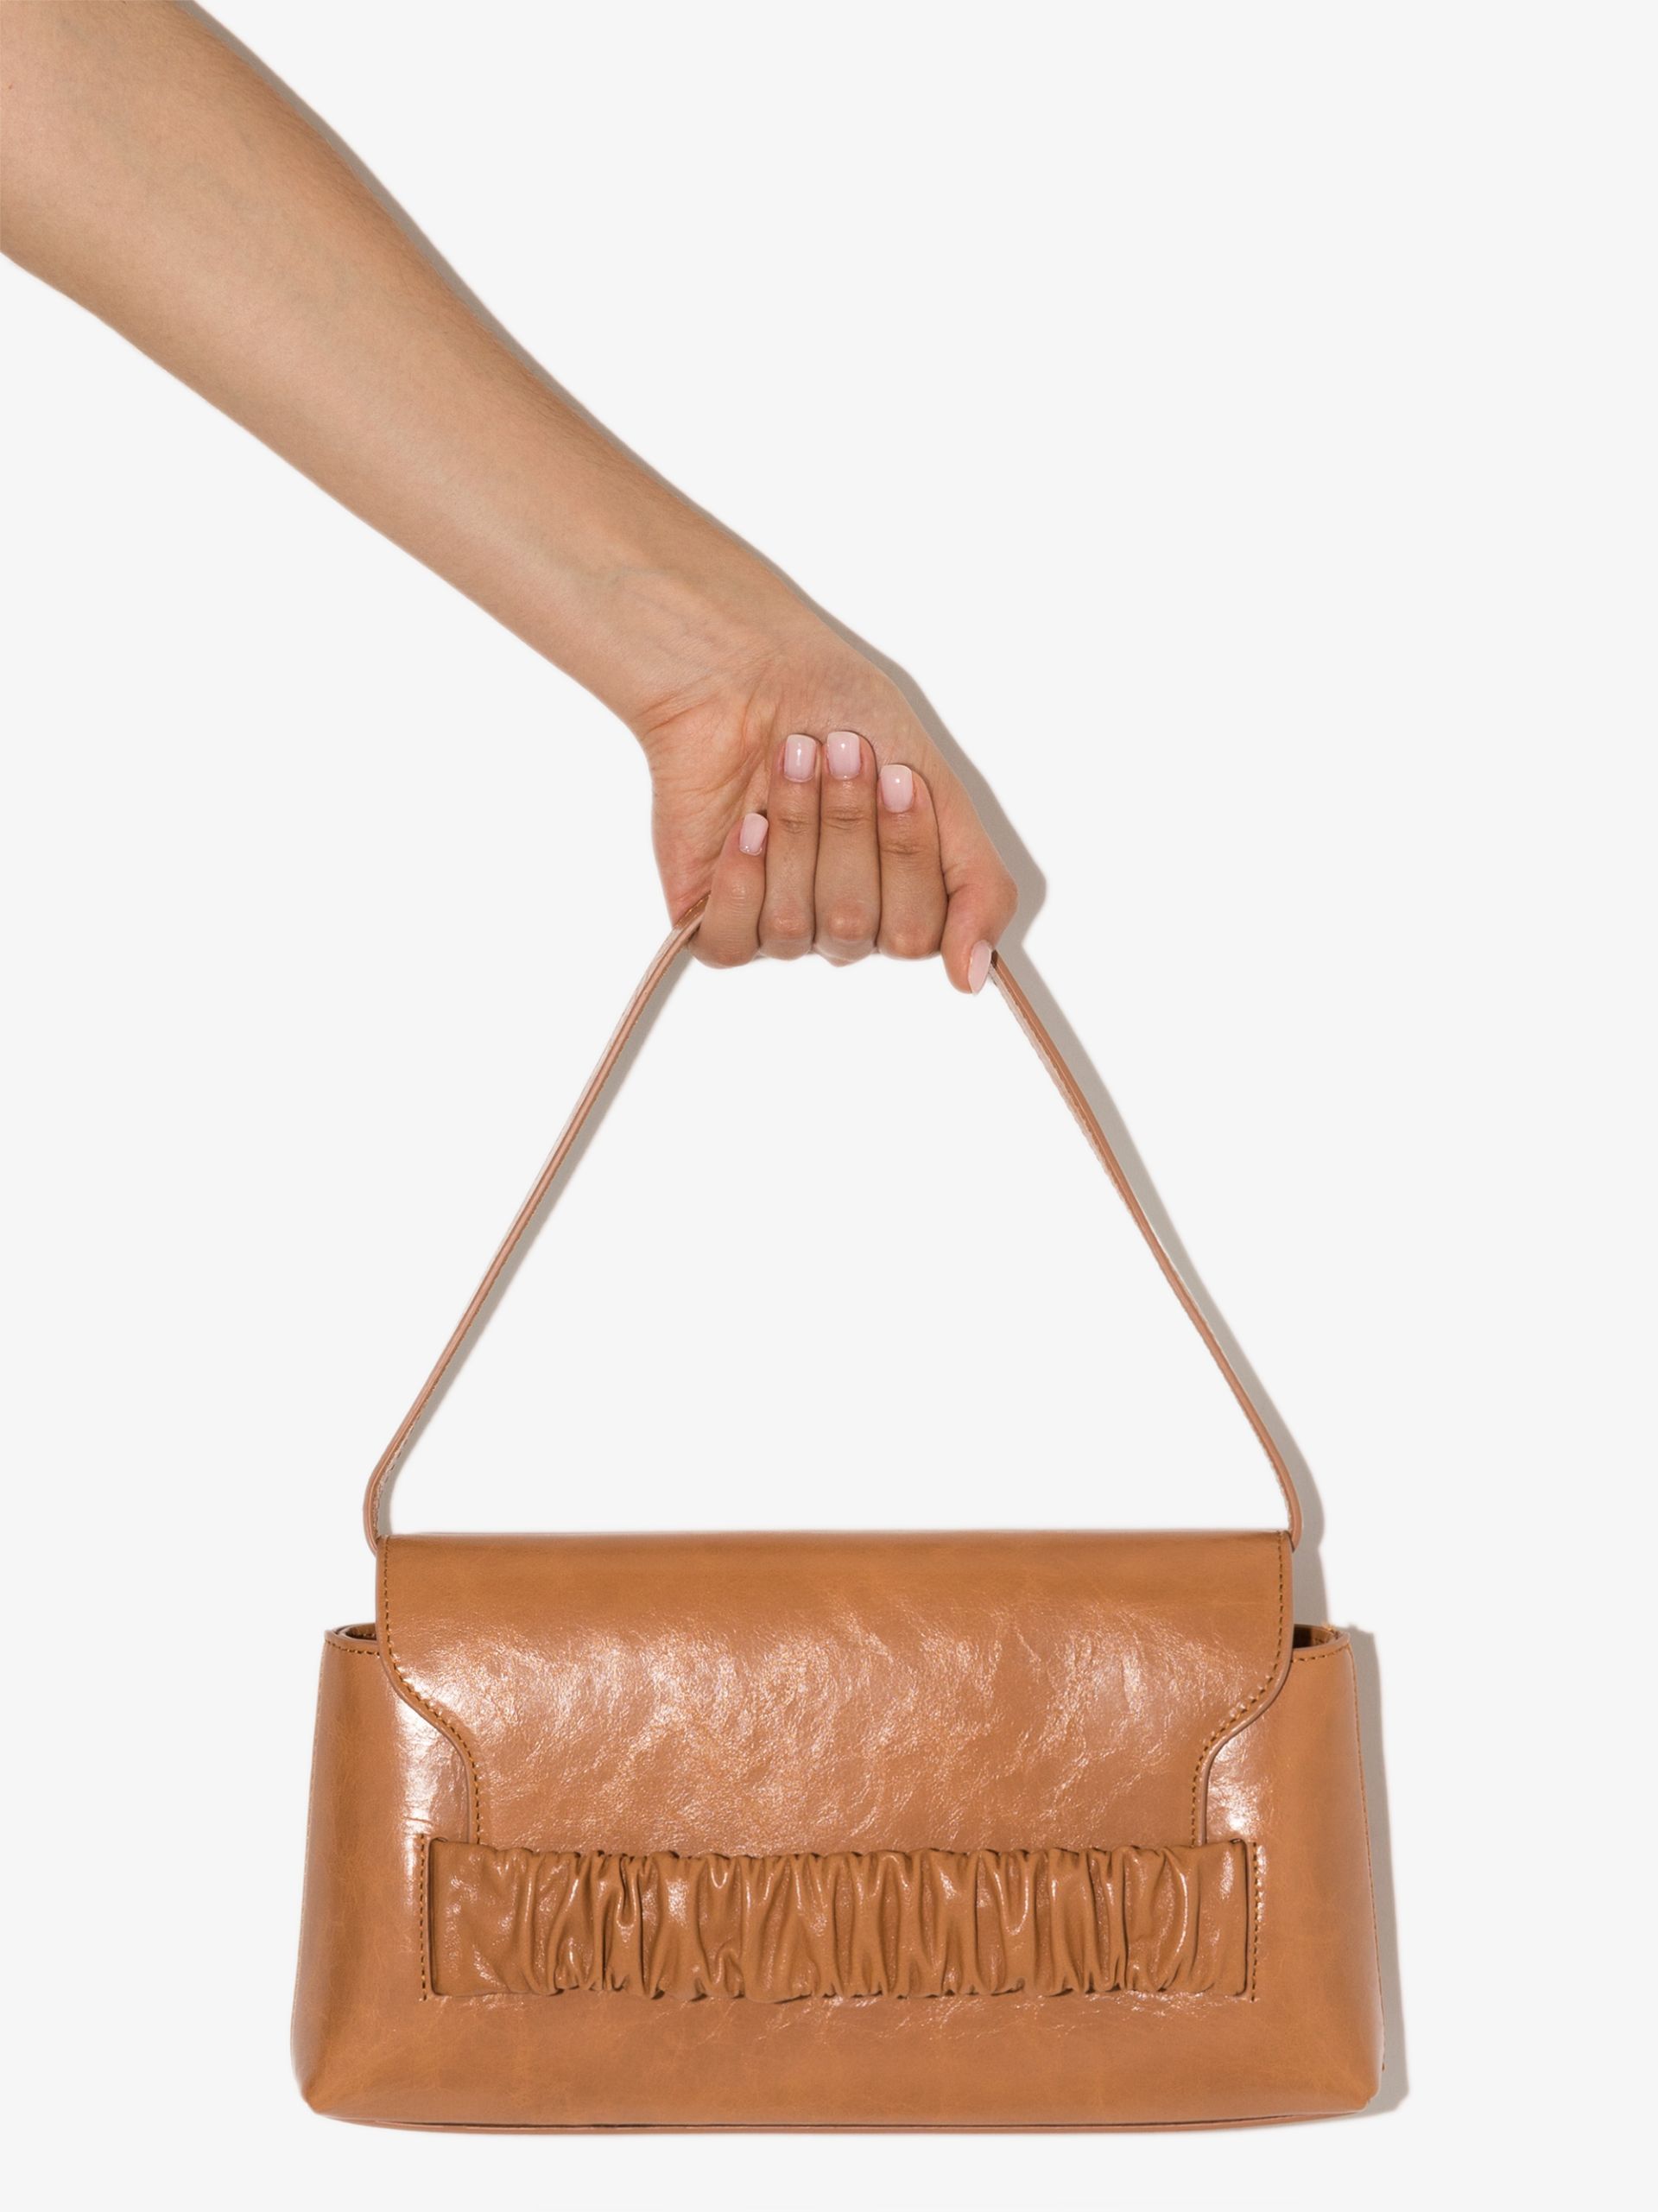 Seven Affordable Non-Designer Bags and Brands - Bellatory